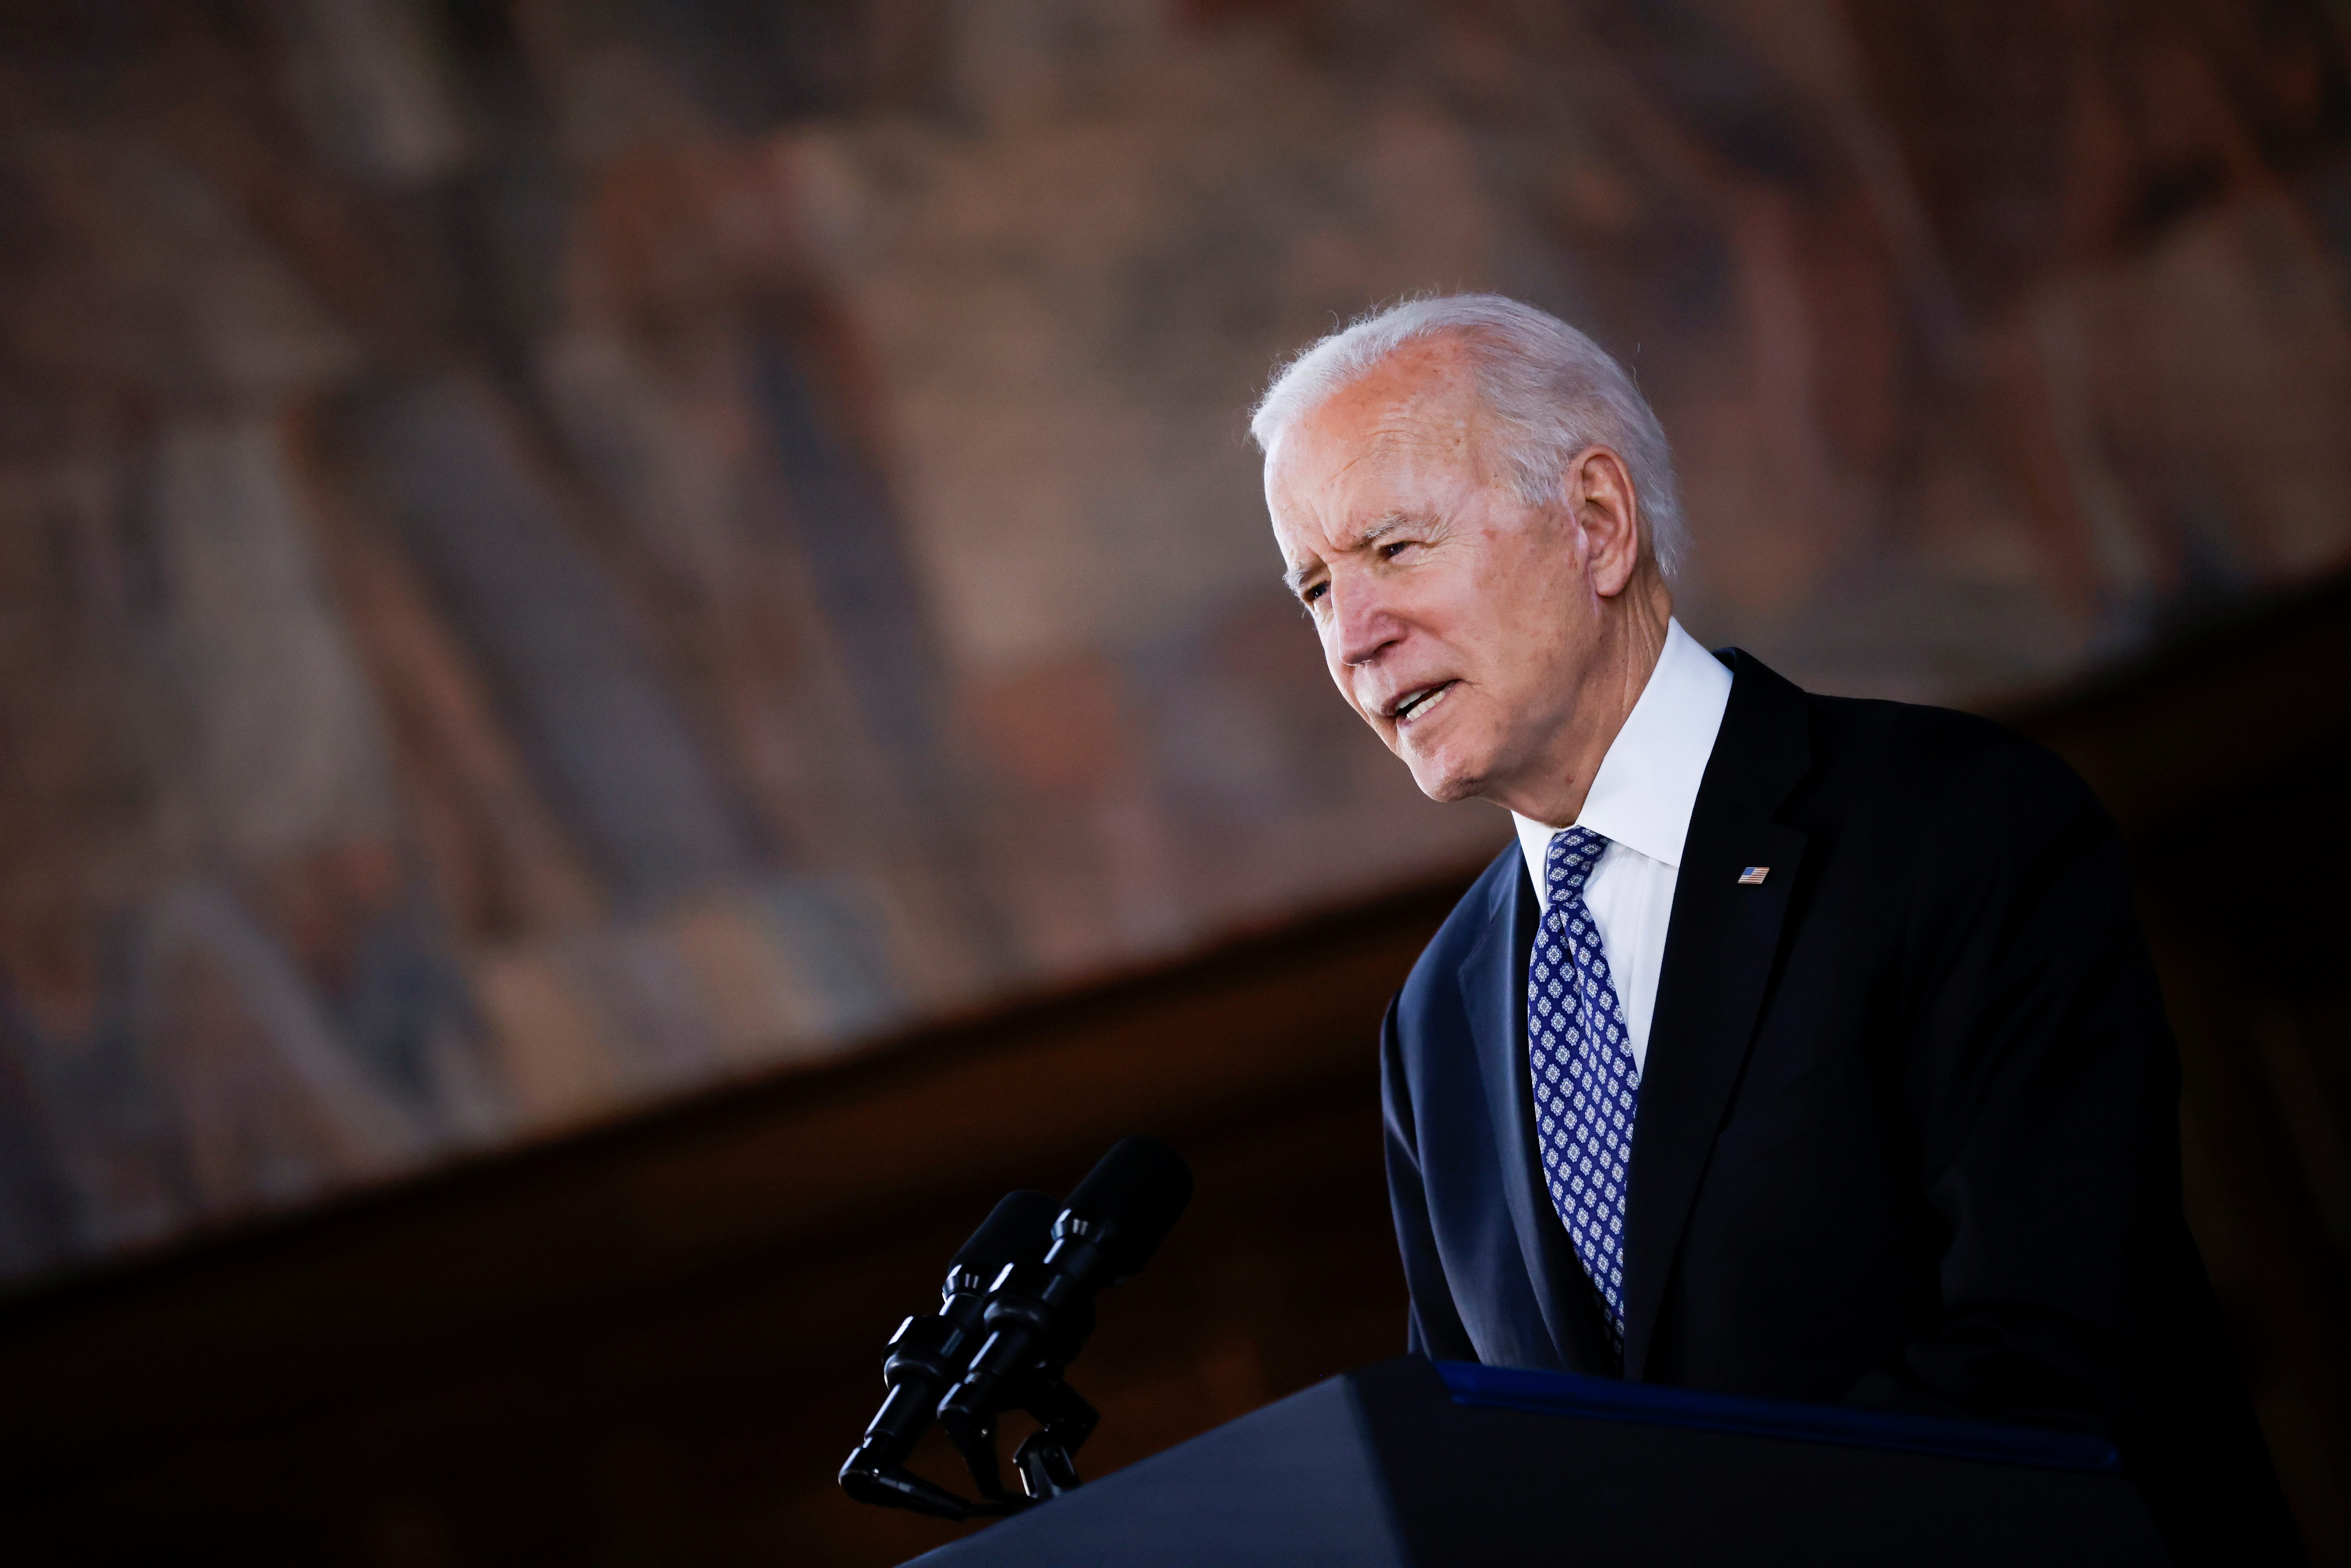 Biden deplores rising anti-Asian violence, asks Americans to stand together against hate